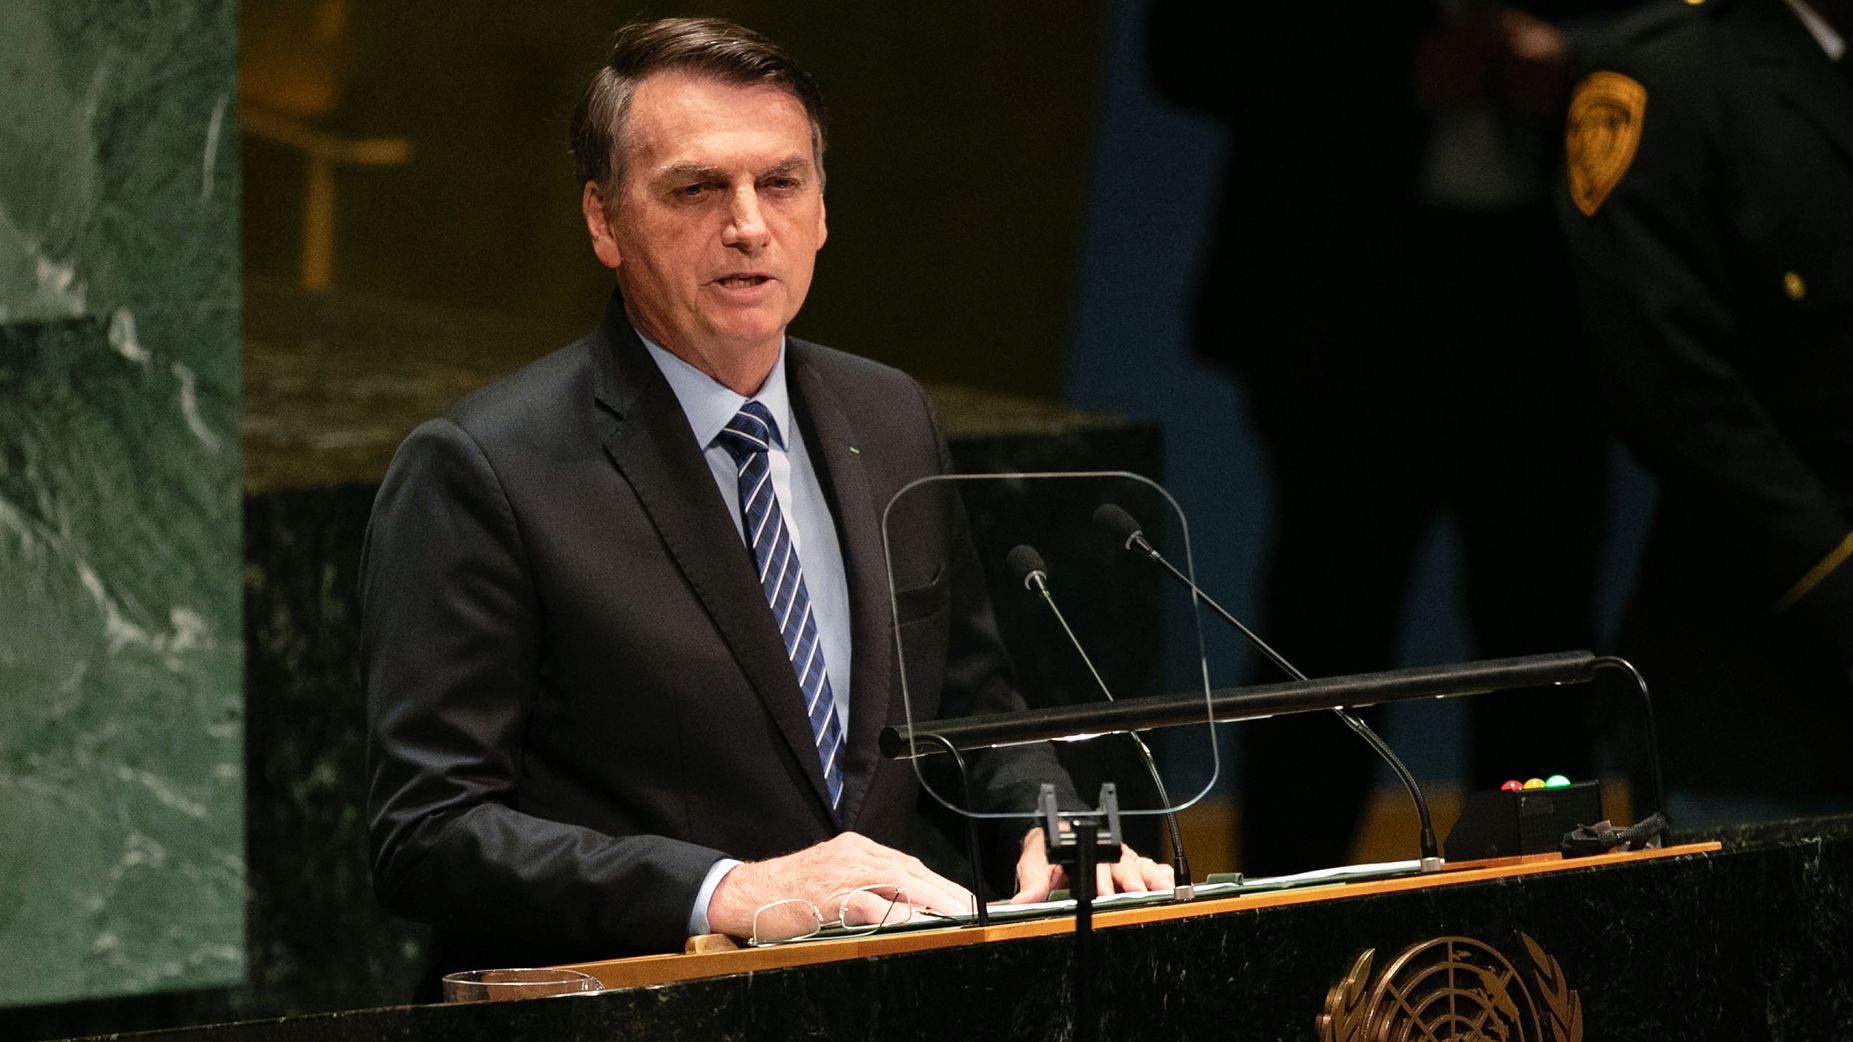 Jair Bolsonaro, Brazil's president, speaks during the UN General Assembly meeting in New York, U.S., on Tuesday, Sept. 24, 2019. 